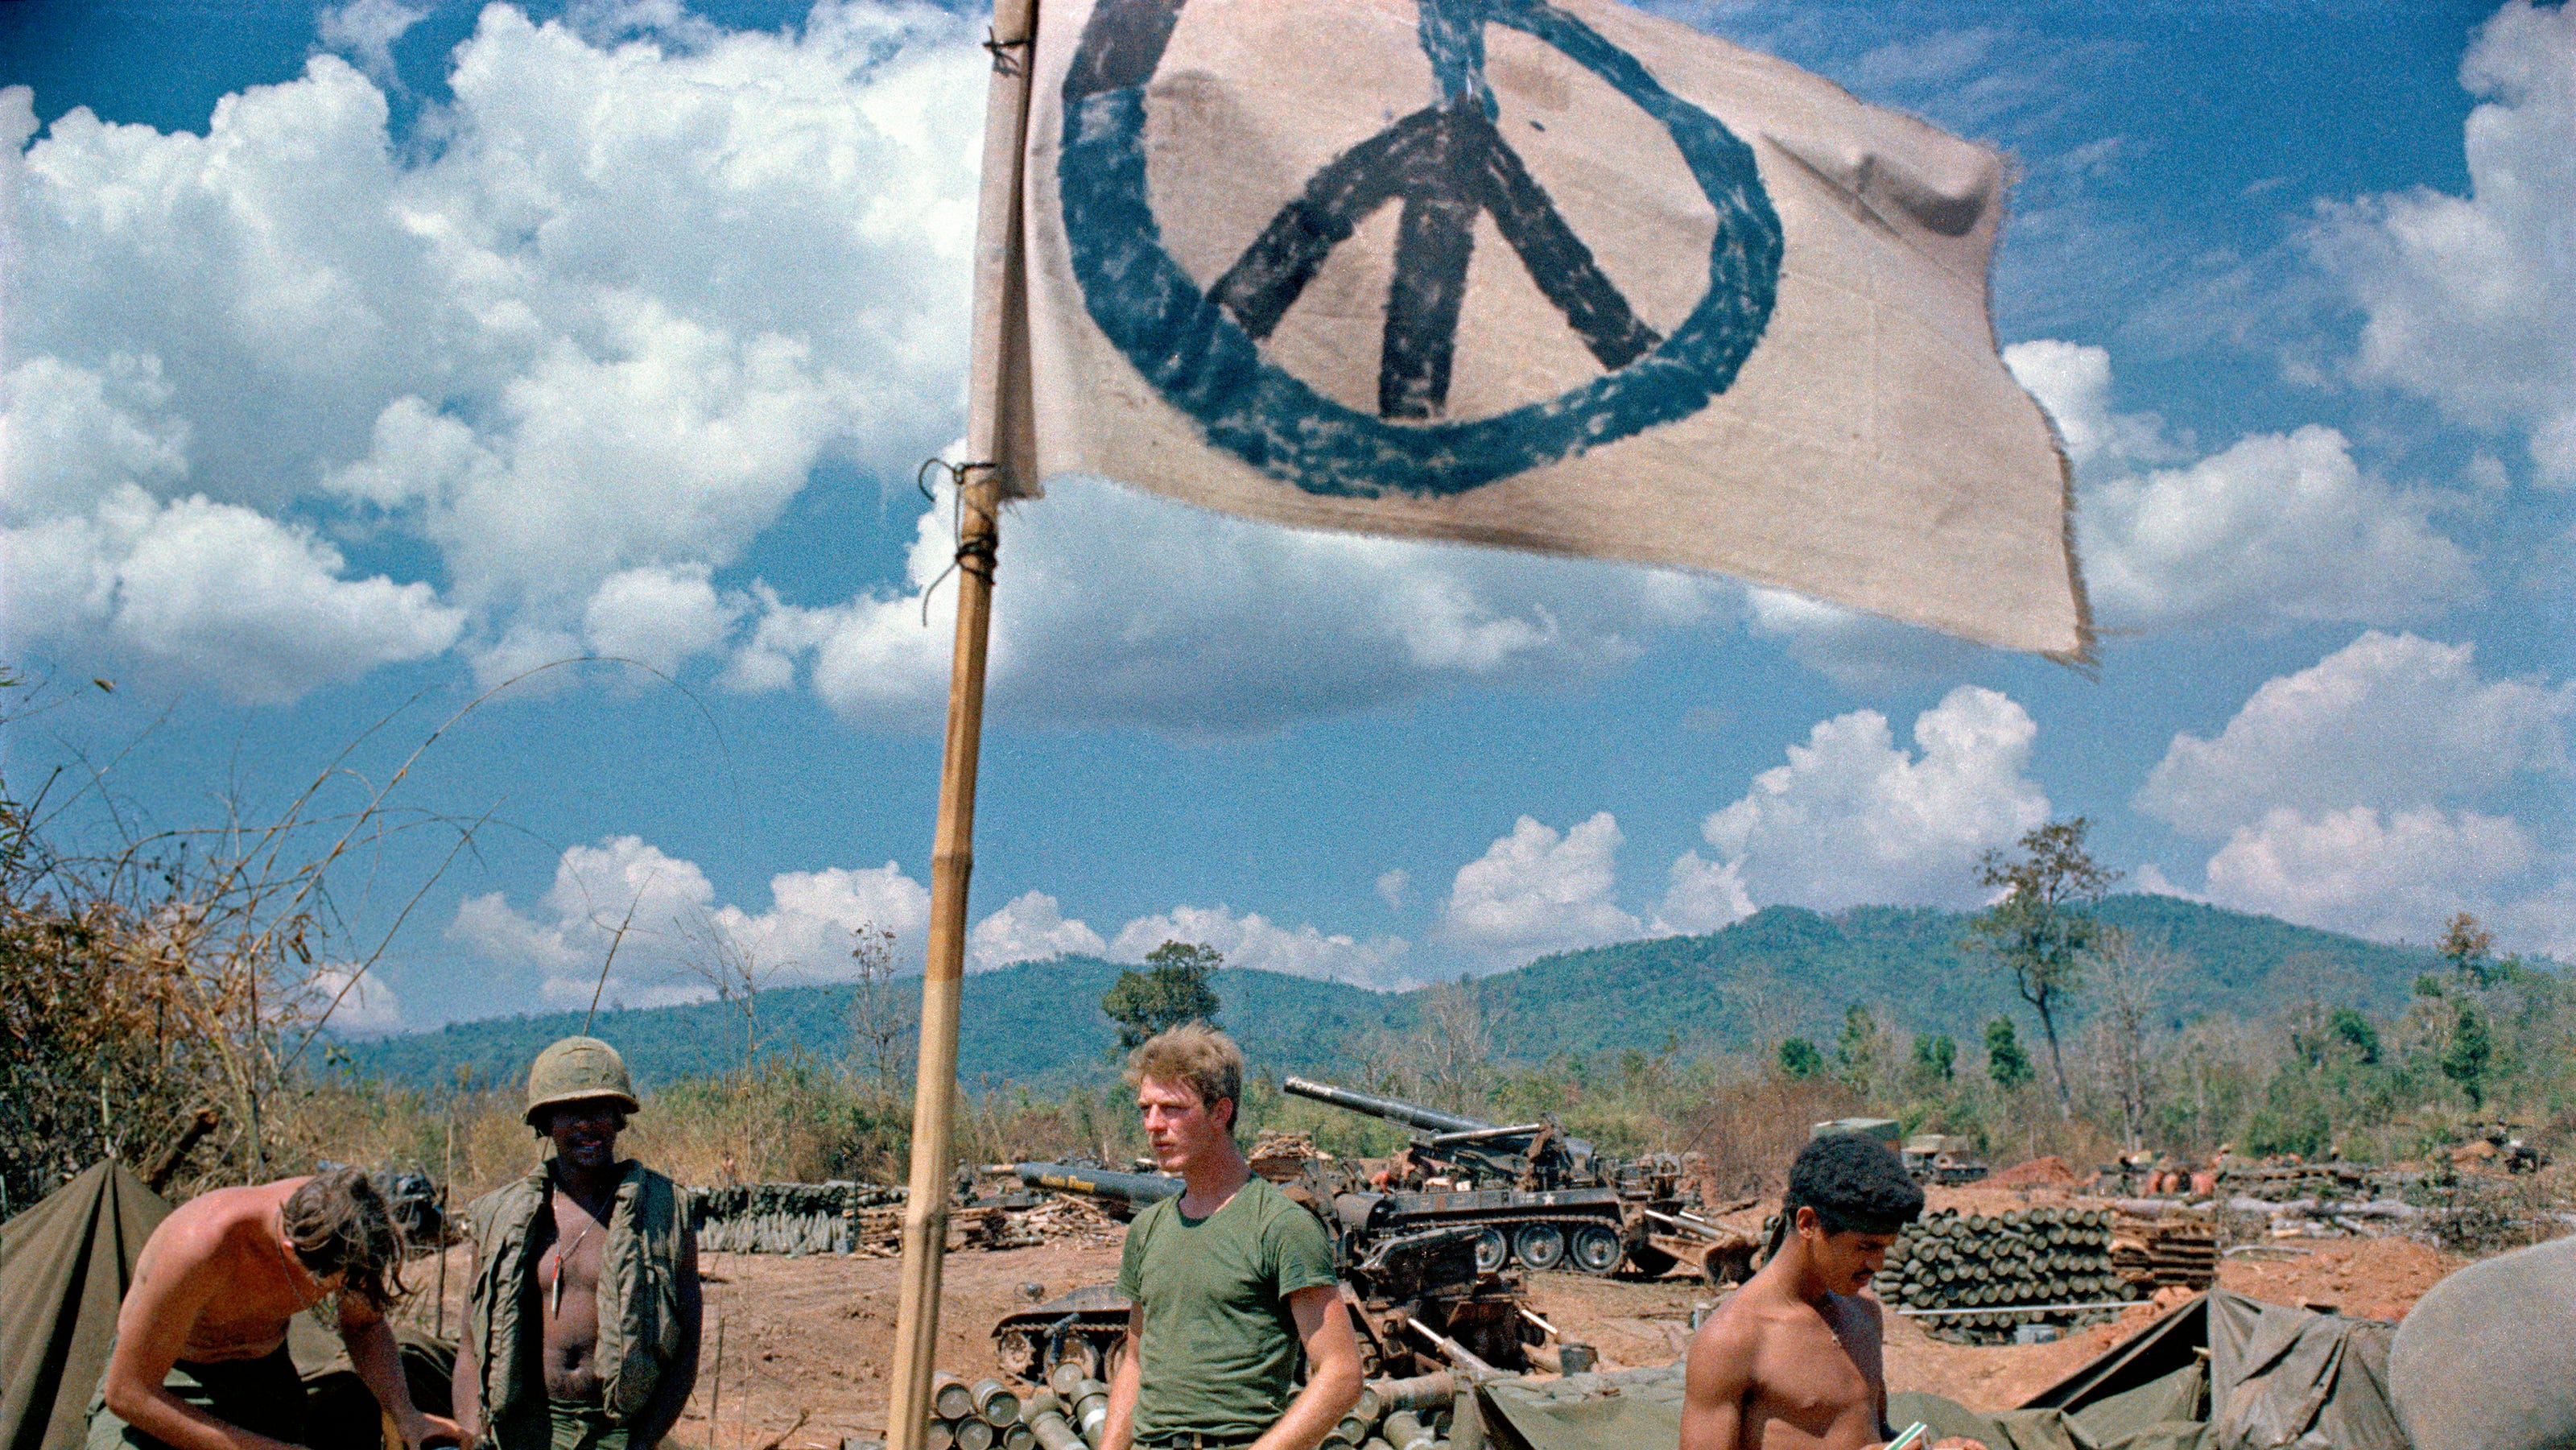  They remember: Five decades after America's withdrawal from Vietnam War 